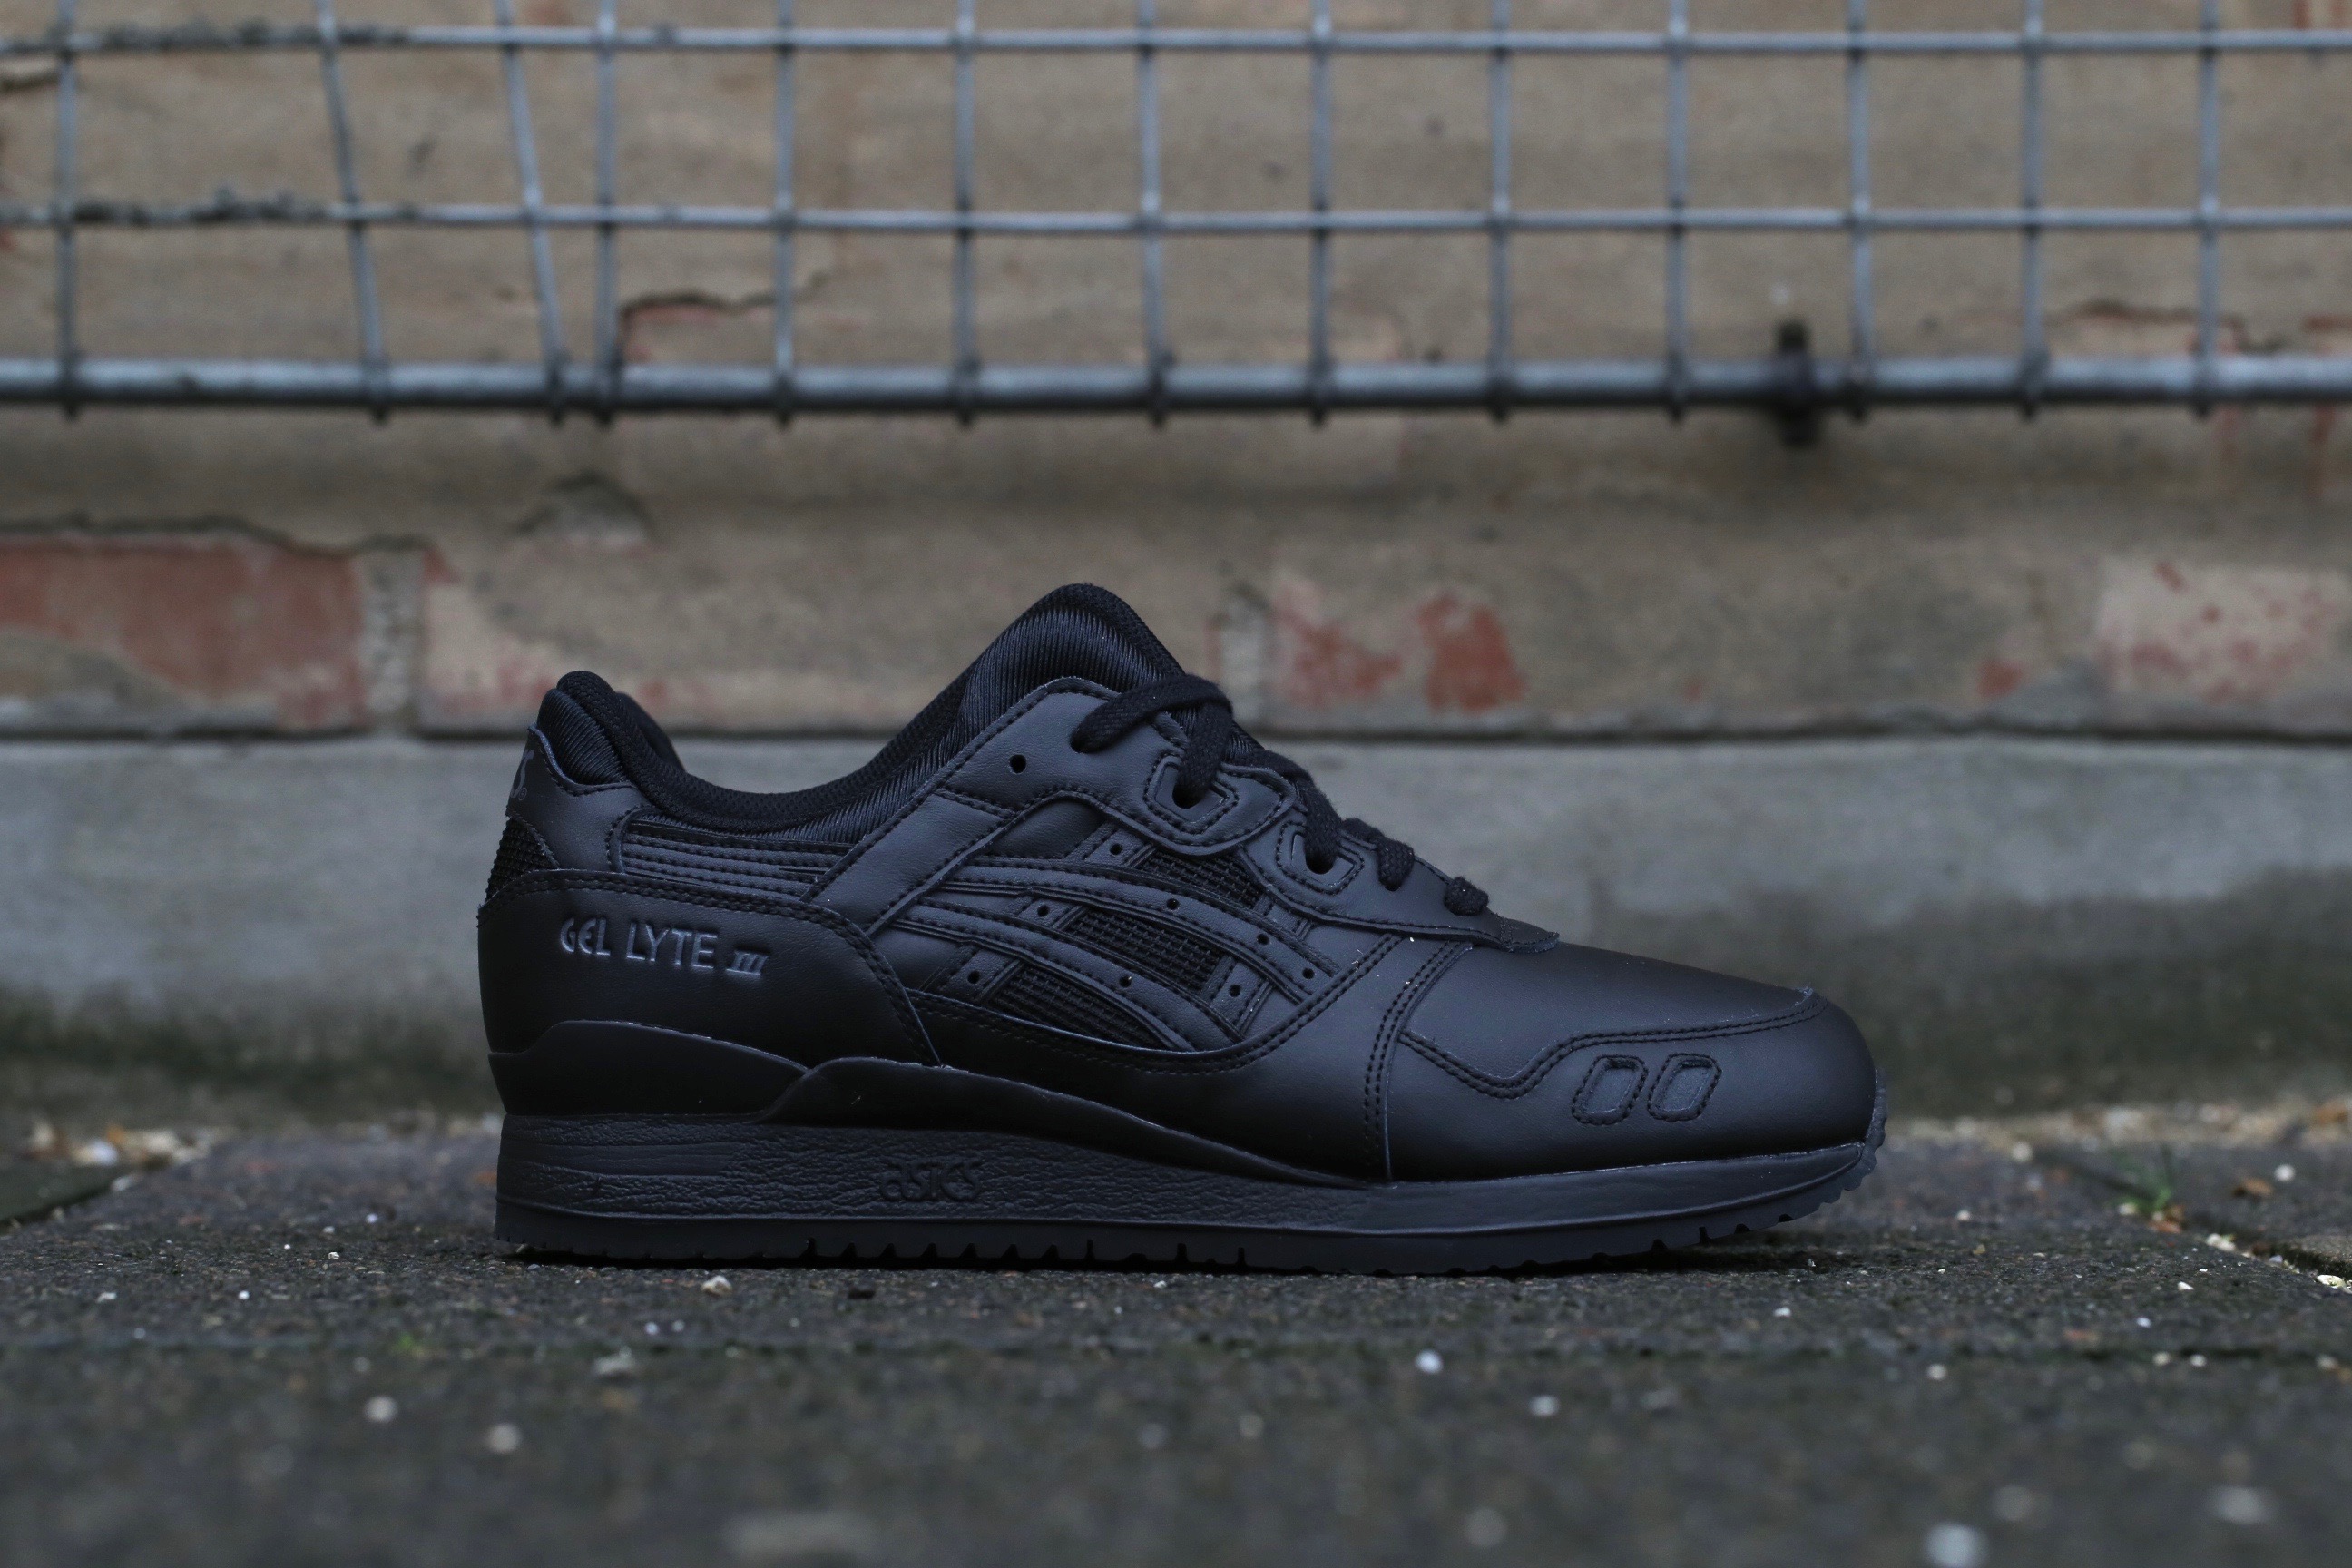 asics all black gel lyte iii,Save up to 18%,www.ilcascinone.com